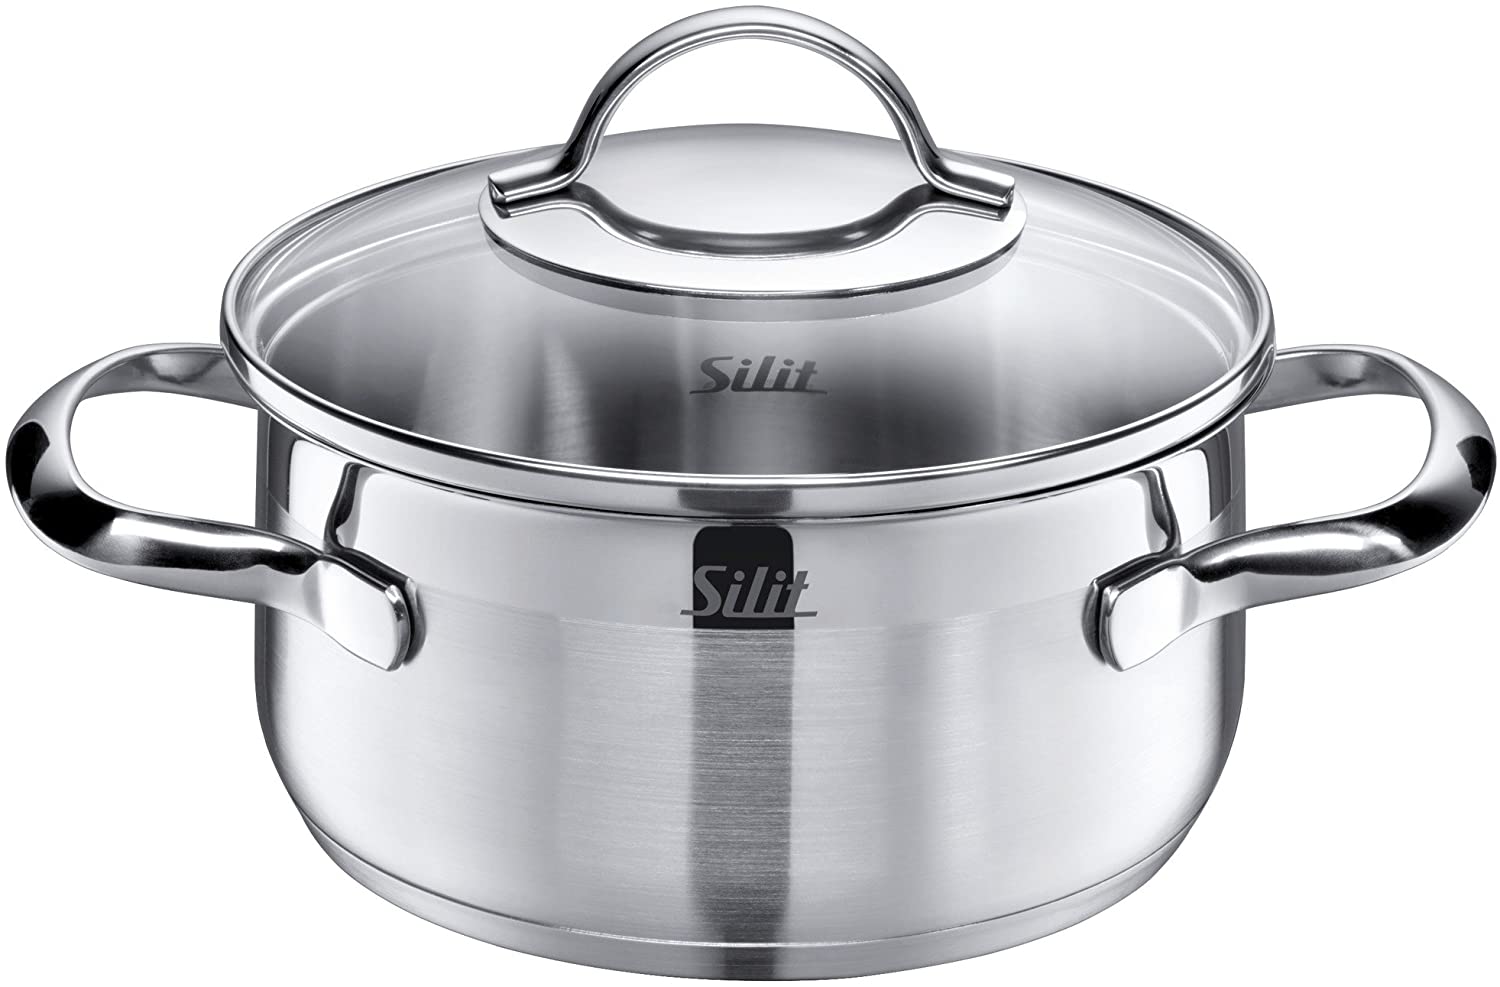 Silit Cooking Pot Diameter 16 cm Approx. Silit Pisa Cooking Pot, 1.4L, Pouring Rim, Glass Lid, Polished Stainless Steel, Suitable for Induction Cookers, Dishwasher Safe, Ø 16 cm